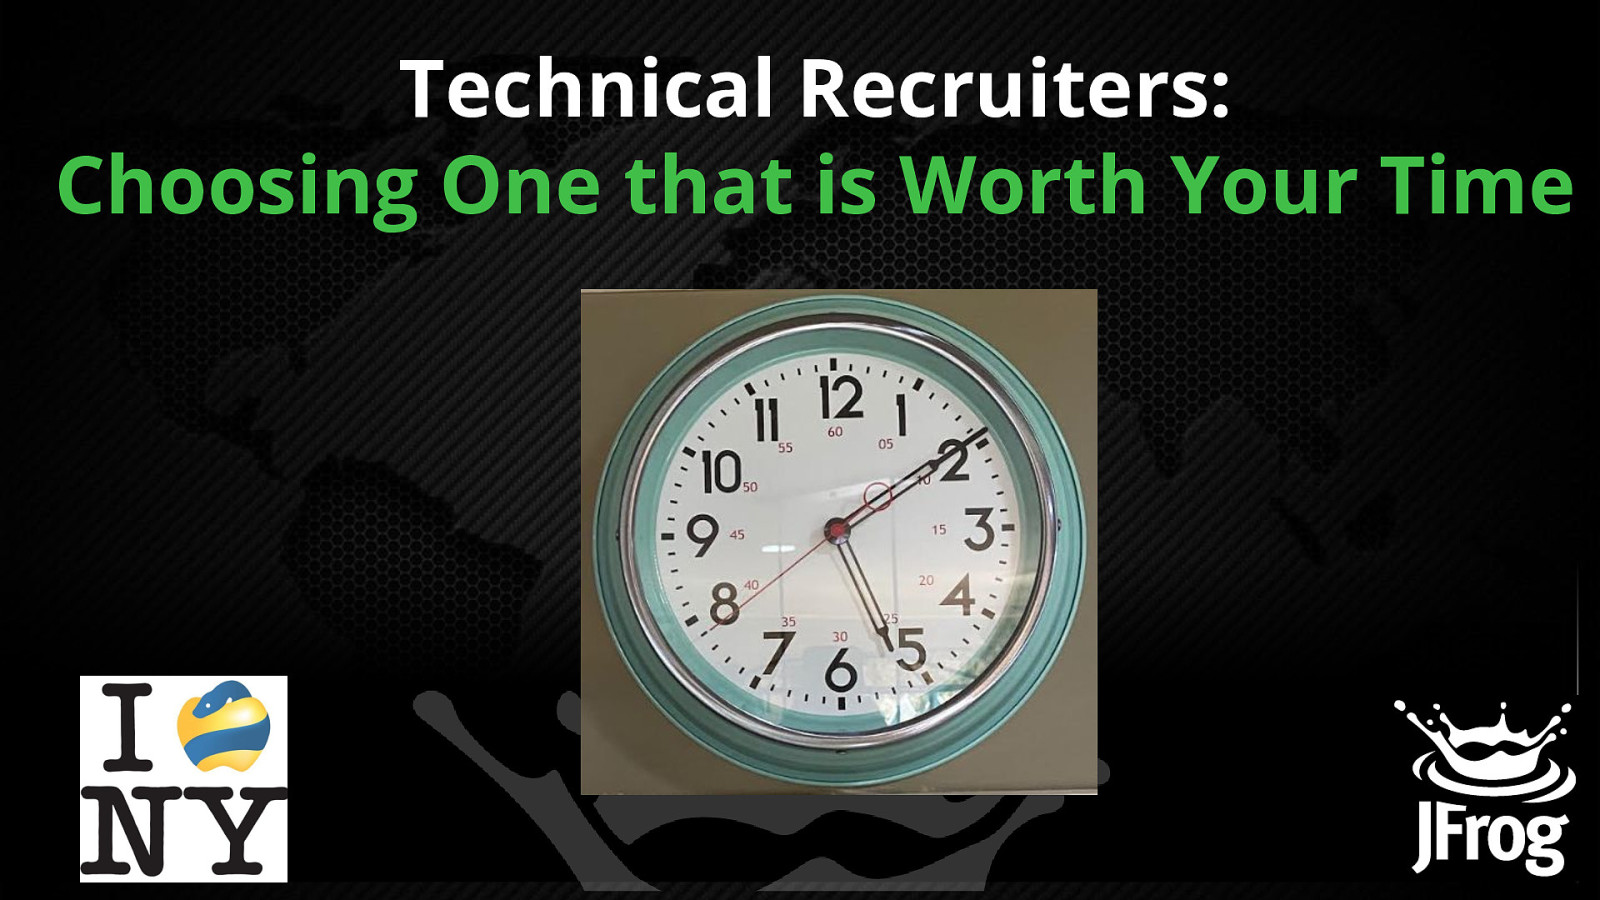 Choosing a Technical Recruiter that is Worth Your Time